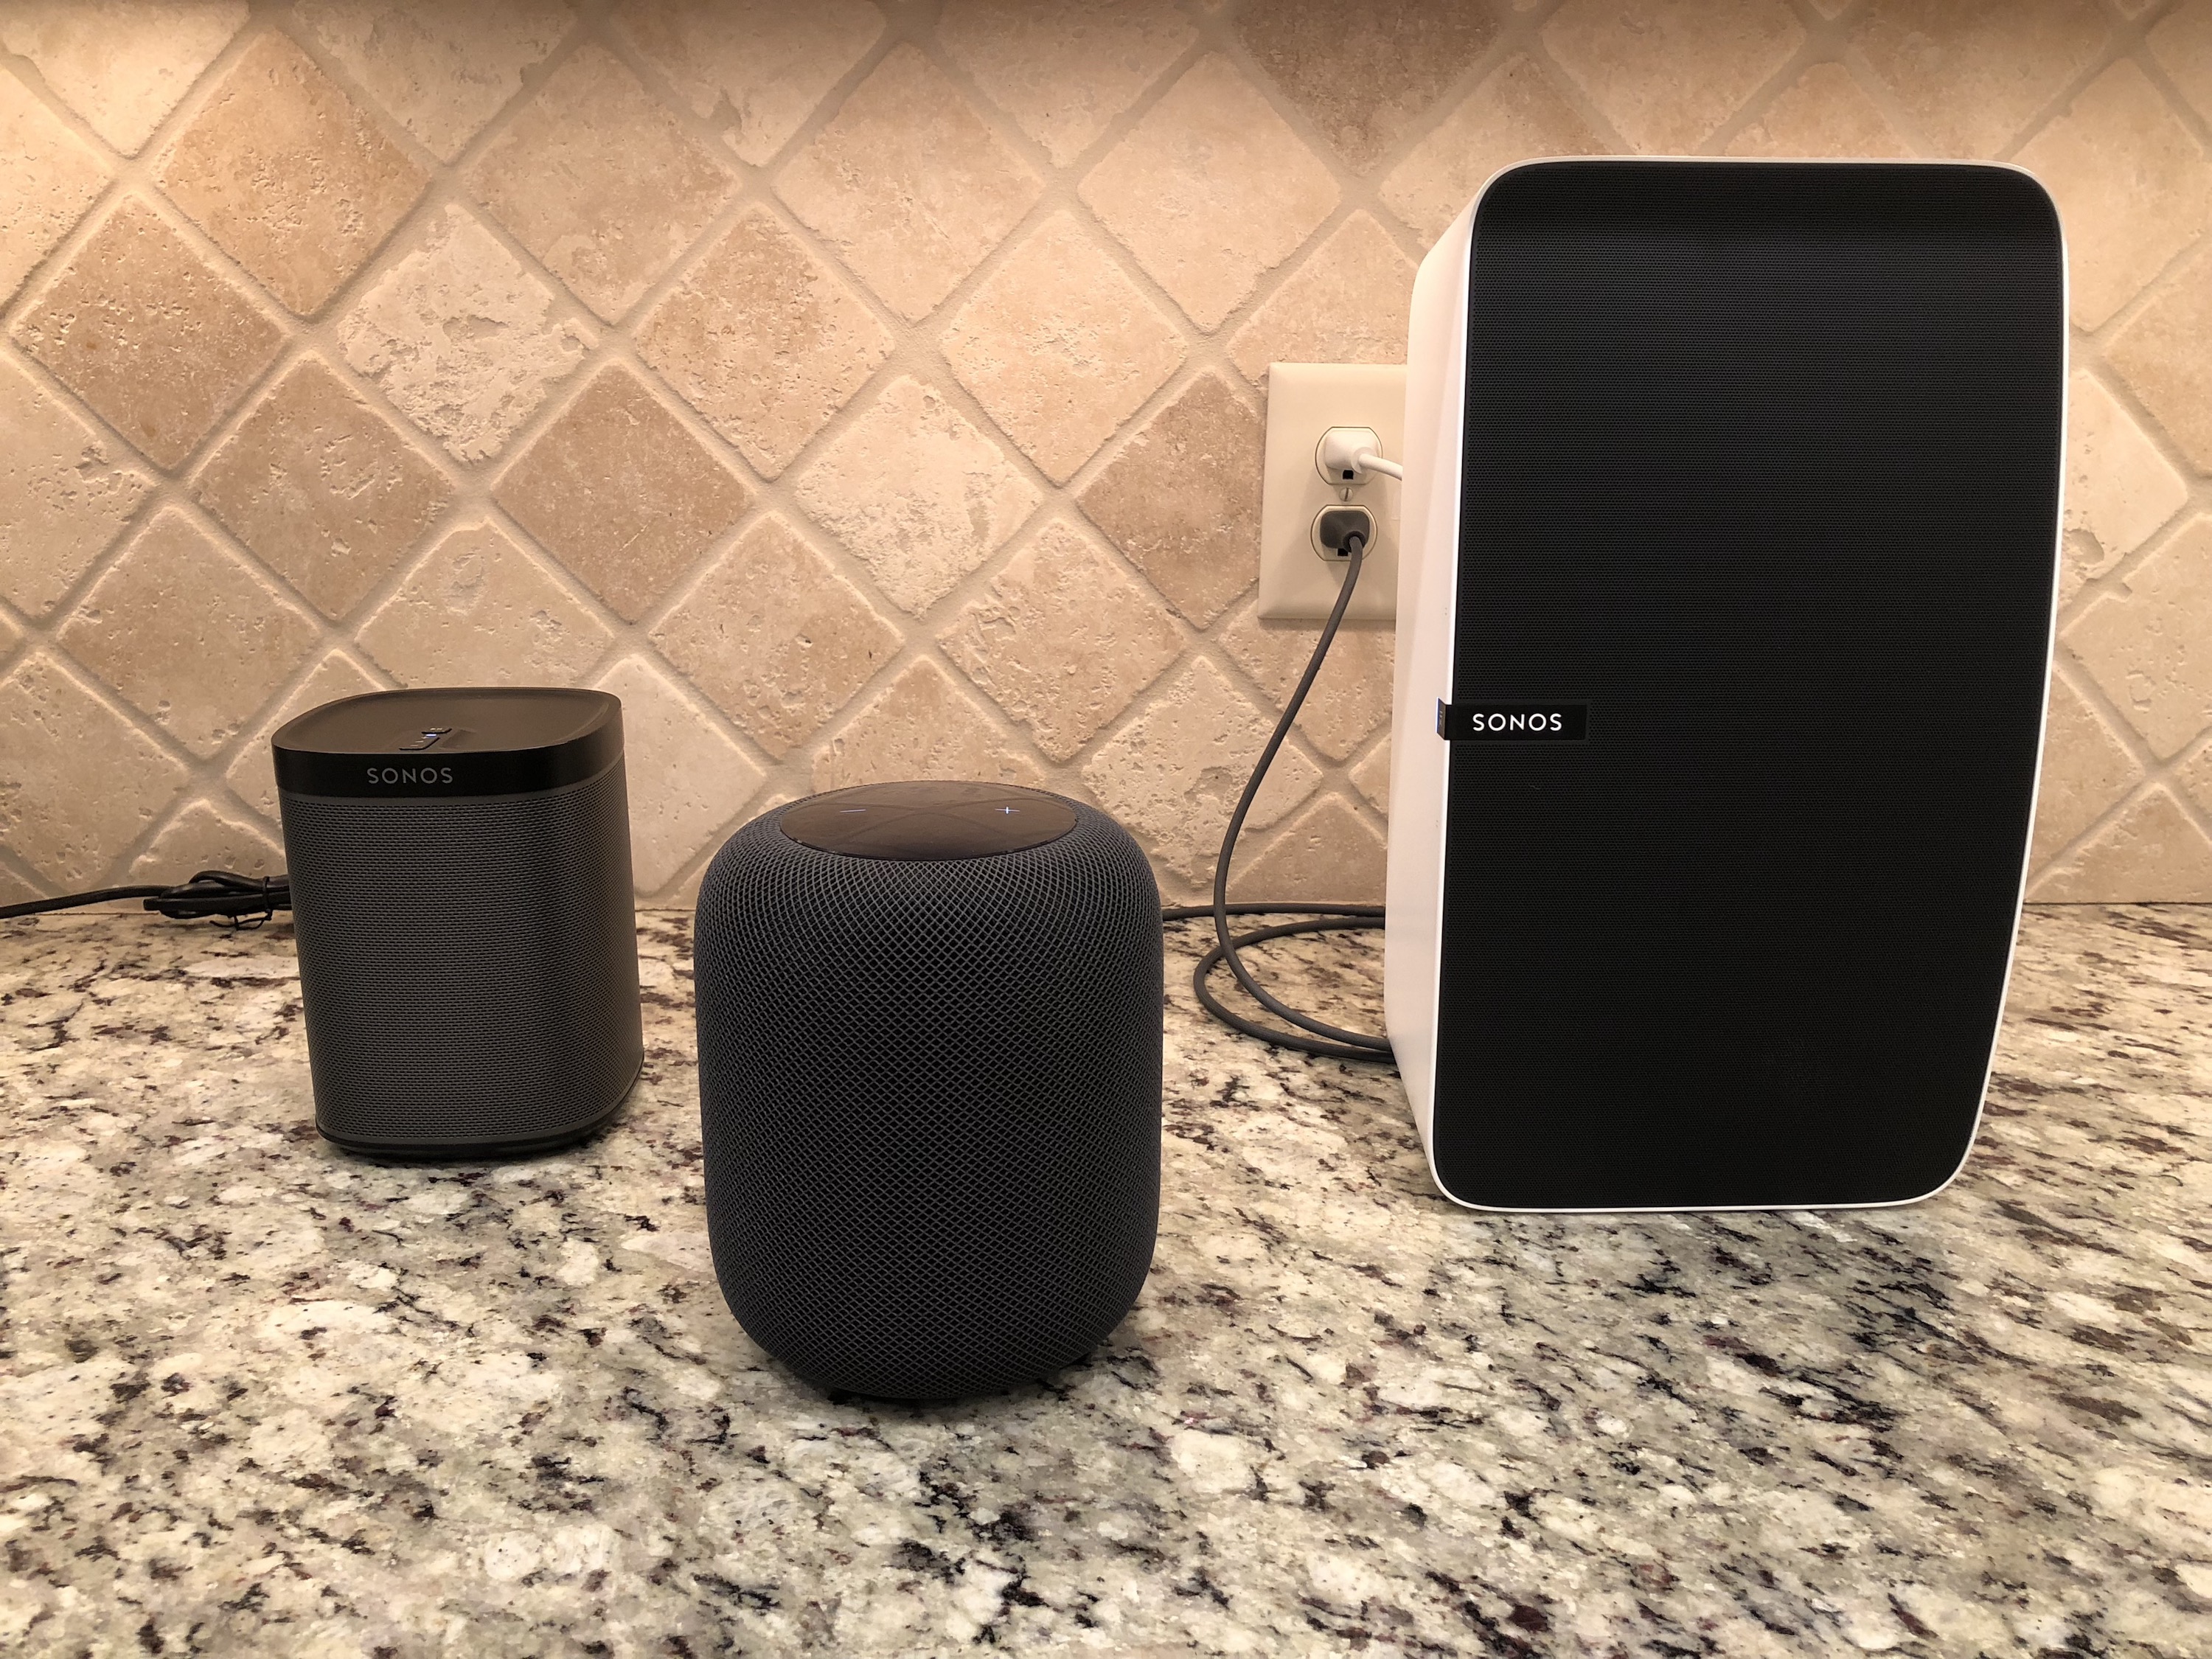 Løsne Potentiel klud My love-hate relationship with HomePod